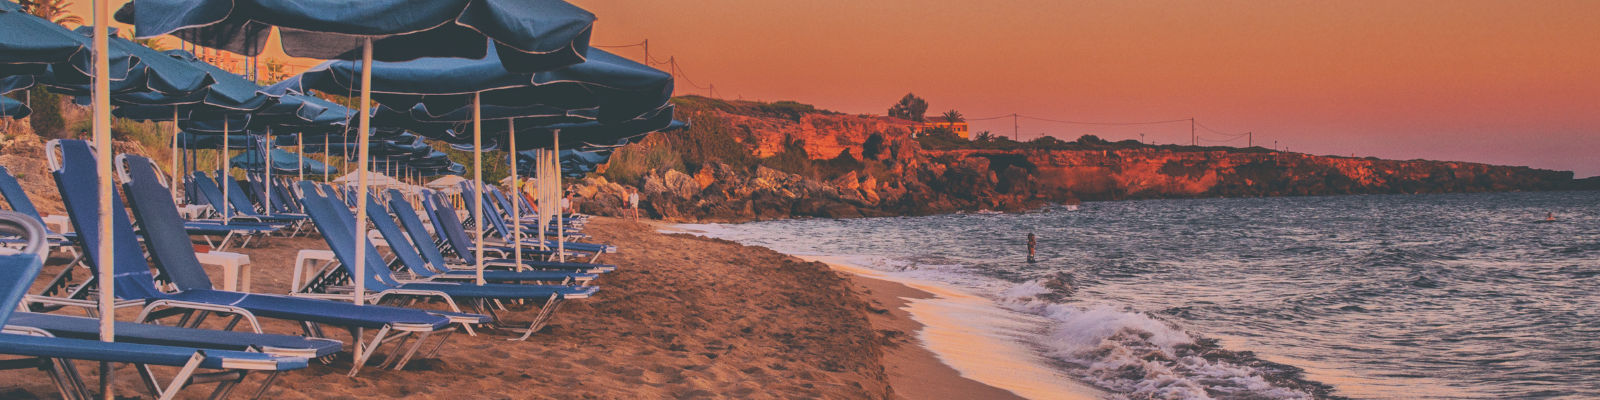 Shore of a beach at sunset with blue lounge chairs covered by blue umbrellas on the left hand side of the image and some small cliffs in the background